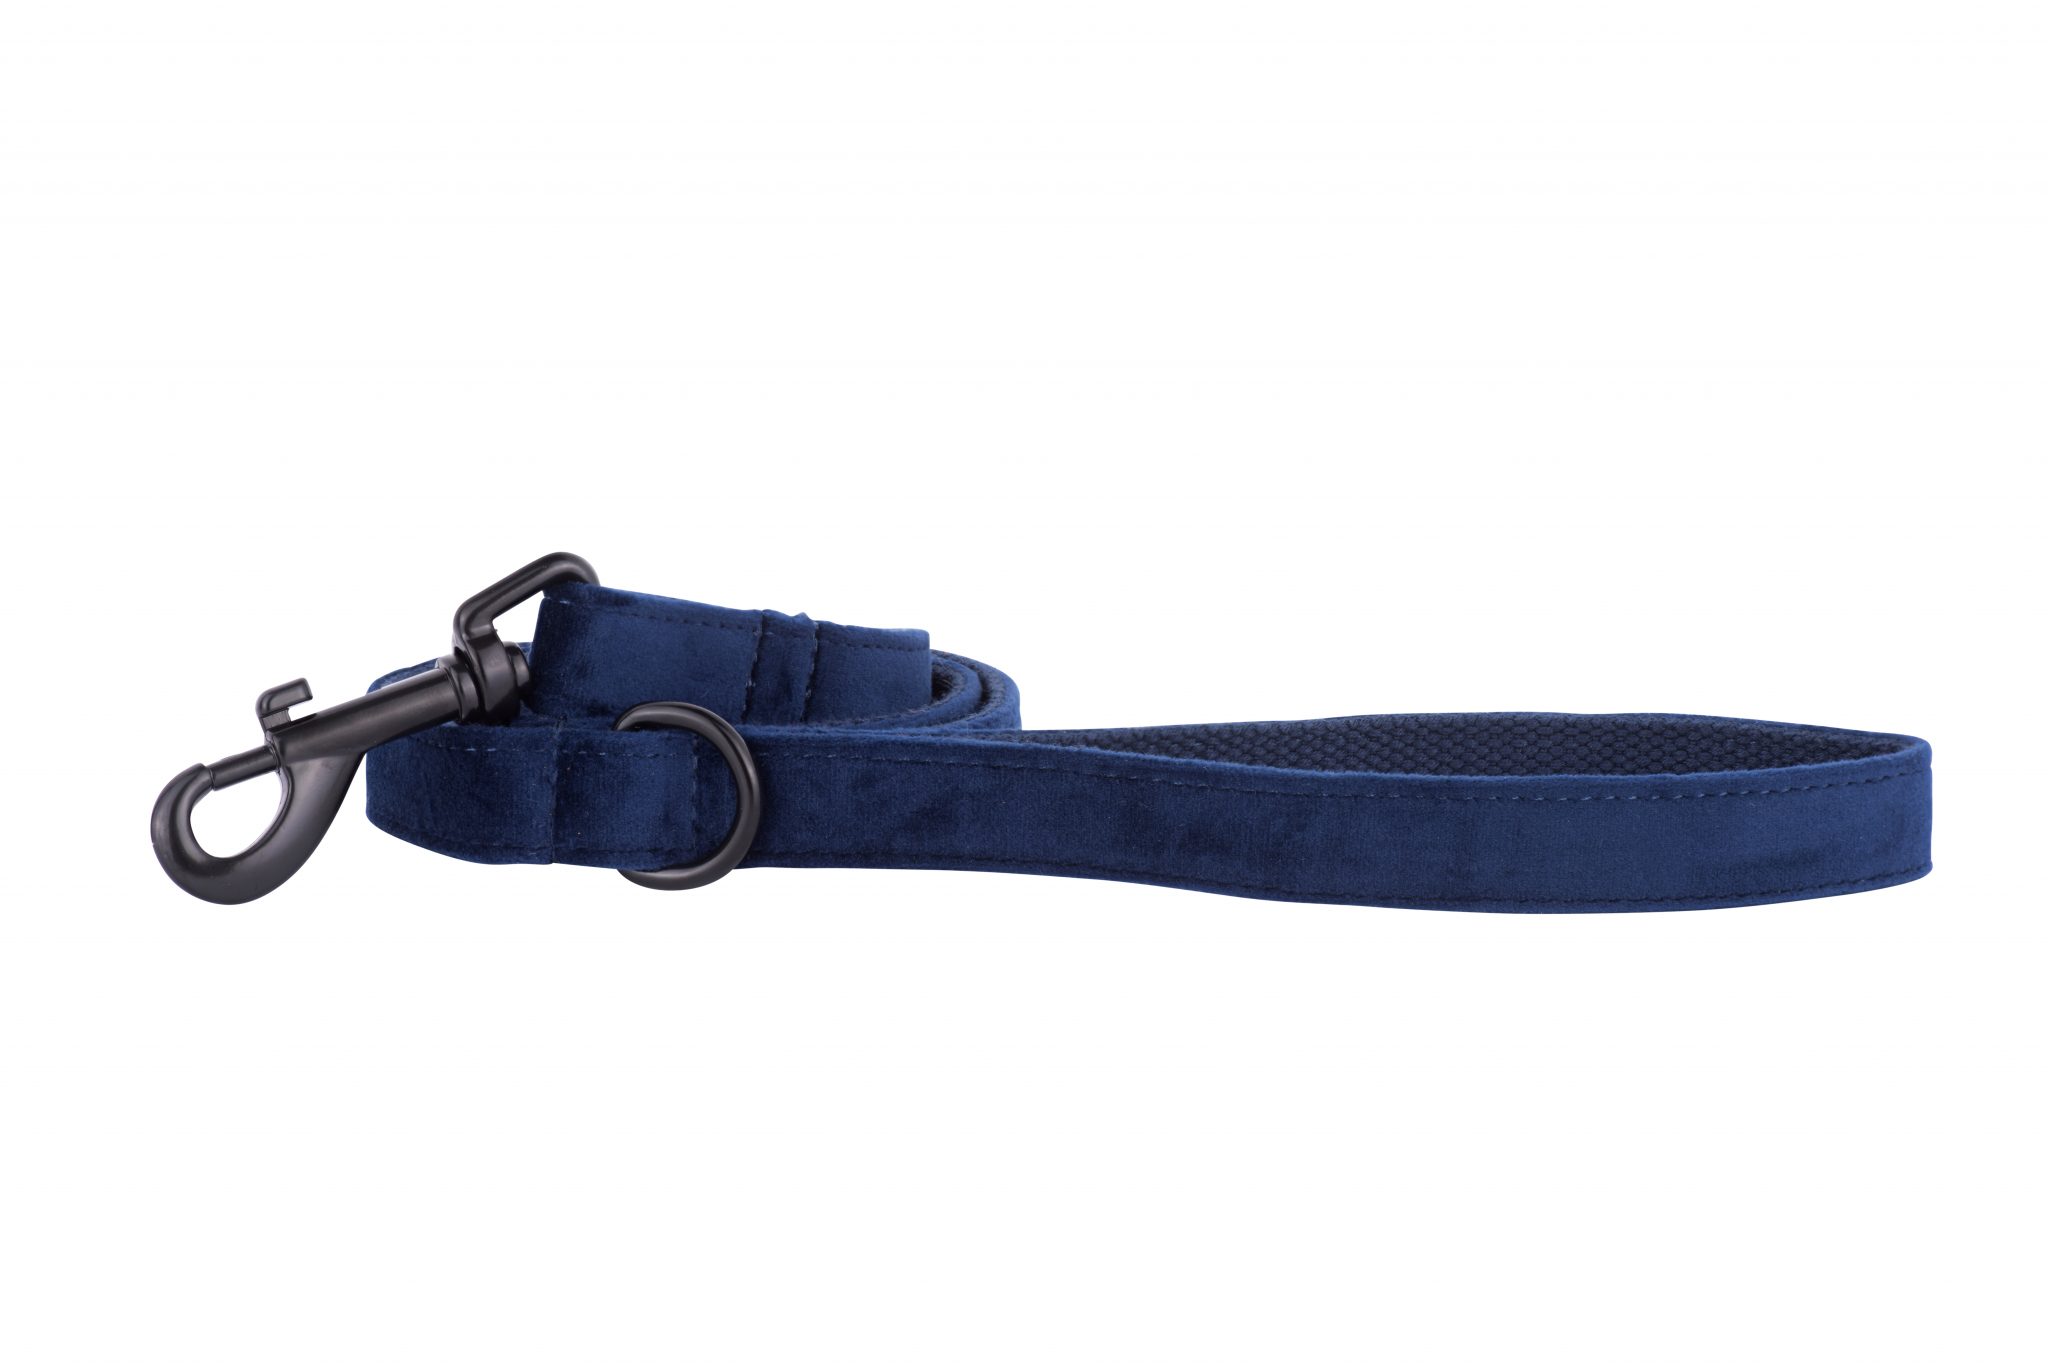 Sapphire designer dog lead by IWOOF with black fittings